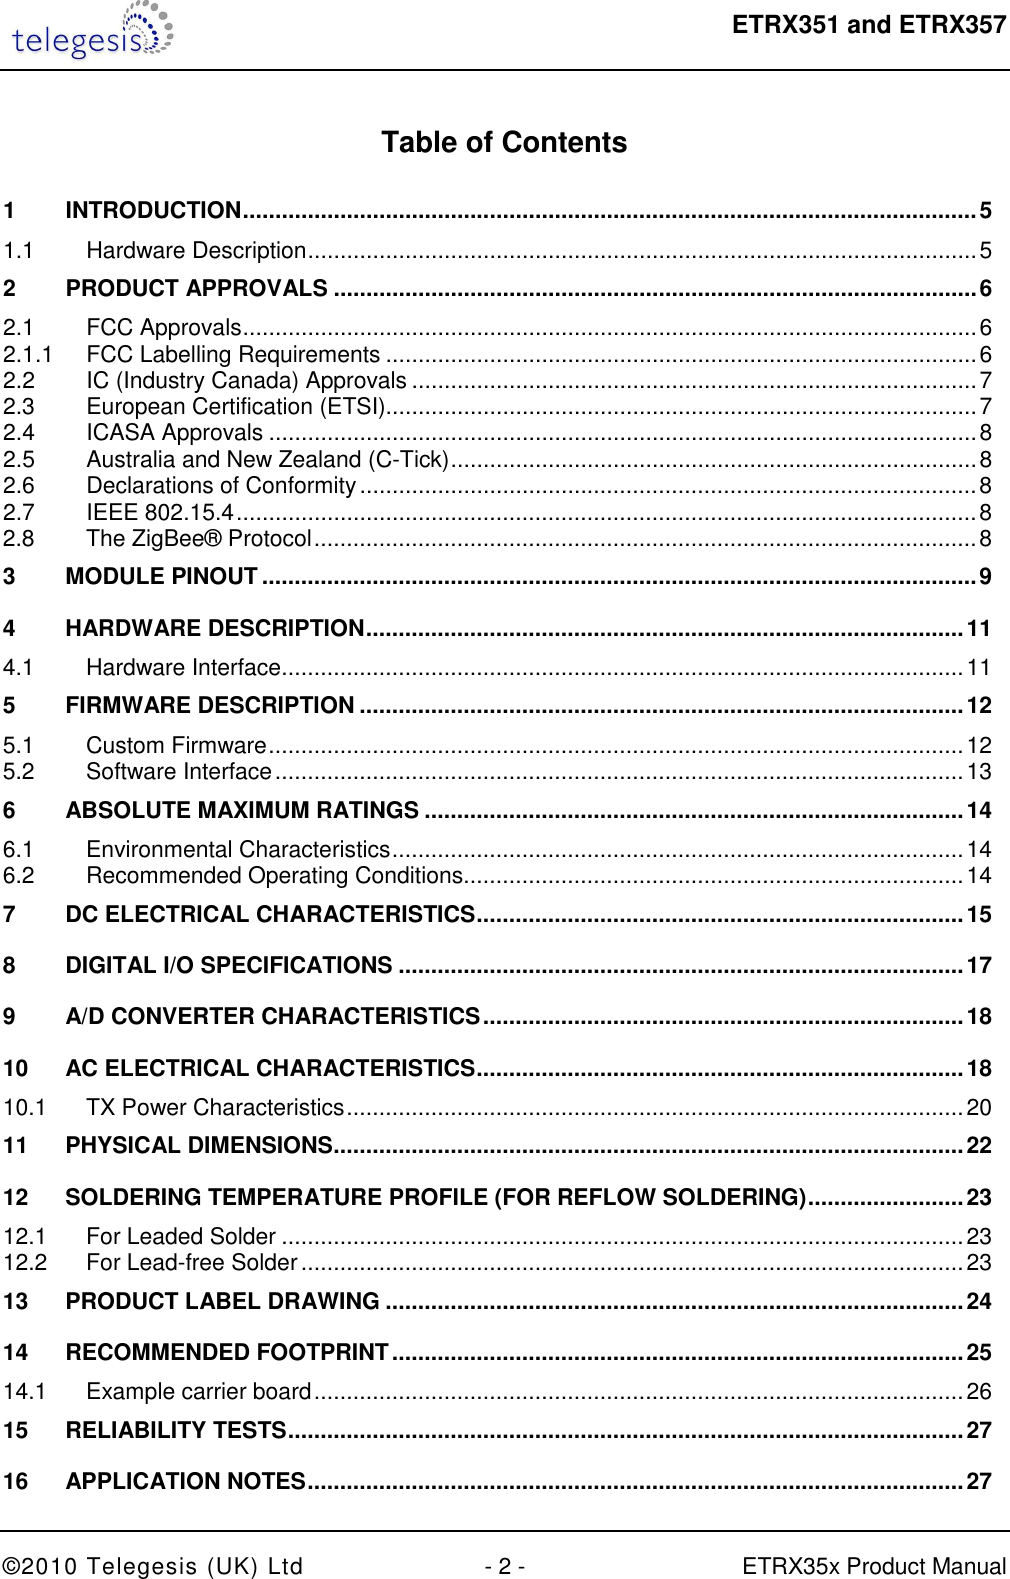  ETRX351 and ETRX357  ©2010 Telegesis (UK) Ltd  - 2 -  ETRX35x Product Manual  Table of Contents  1 INTRODUCTION ................................................................................................................. 5 1.1 Hardware Description ....................................................................................................... 5 2 PRODUCT APPROVALS ................................................................................................... 6 2.1 FCC Approvals ................................................................................................................. 6 2.1.1 FCC Labelling Requirements ........................................................................................... 6 2.2 IC (Industry Canada) Approvals ....................................................................................... 7 2.3 European Certification (ETSI)........................................................................................... 7 2.4 ICASA Approvals ............................................................................................................. 8 2.5 Australia and New Zealand (C-Tick) ................................................................................. 8 2.6 Declarations of Conformity ............................................................................................... 8 2.7 IEEE 802.15.4 .................................................................................................................. 8 2.8 The ZigBee® Protocol ...................................................................................................... 8 3 MODULE PINOUT .............................................................................................................. 9 4 HARDWARE DESCRIPTION ............................................................................................ 11 4.1 Hardware Interface ......................................................................................................... 11 5 FIRMWARE DESCRIPTION ............................................................................................. 12 5.1 Custom Firmware ........................................................................................................... 12 5.2 Software Interface .......................................................................................................... 13 6 ABSOLUTE MAXIMUM RATINGS ................................................................................... 14 6.1 Environmental Characteristics ........................................................................................ 14 6.2 Recommended Operating Conditions............................................................................. 14 7 DC ELECTRICAL CHARACTERISTICS ........................................................................... 15 8 DIGITAL I/O SPECIFICATIONS ....................................................................................... 17 9 A/D CONVERTER CHARACTERISTICS .......................................................................... 18 10 AC ELECTRICAL CHARACTERISTICS ........................................................................... 18 10.1 TX Power Characteristics ............................................................................................... 20 11 PHYSICAL DIMENSIONS ................................................................................................. 22 12 SOLDERING TEMPERATURE PROFILE (FOR REFLOW SOLDERING) ........................ 23 12.1 For Leaded Solder ......................................................................................................... 23 12.2 For Lead-free Solder ...................................................................................................... 23 13 PRODUCT LABEL DRAWING ......................................................................................... 24 14 RECOMMENDED FOOTPRINT ........................................................................................ 25 14.1 Example carrier board .................................................................................................... 26 15 RELIABILITY TESTS ........................................................................................................ 27 16 APPLICATION NOTES ..................................................................................................... 27 